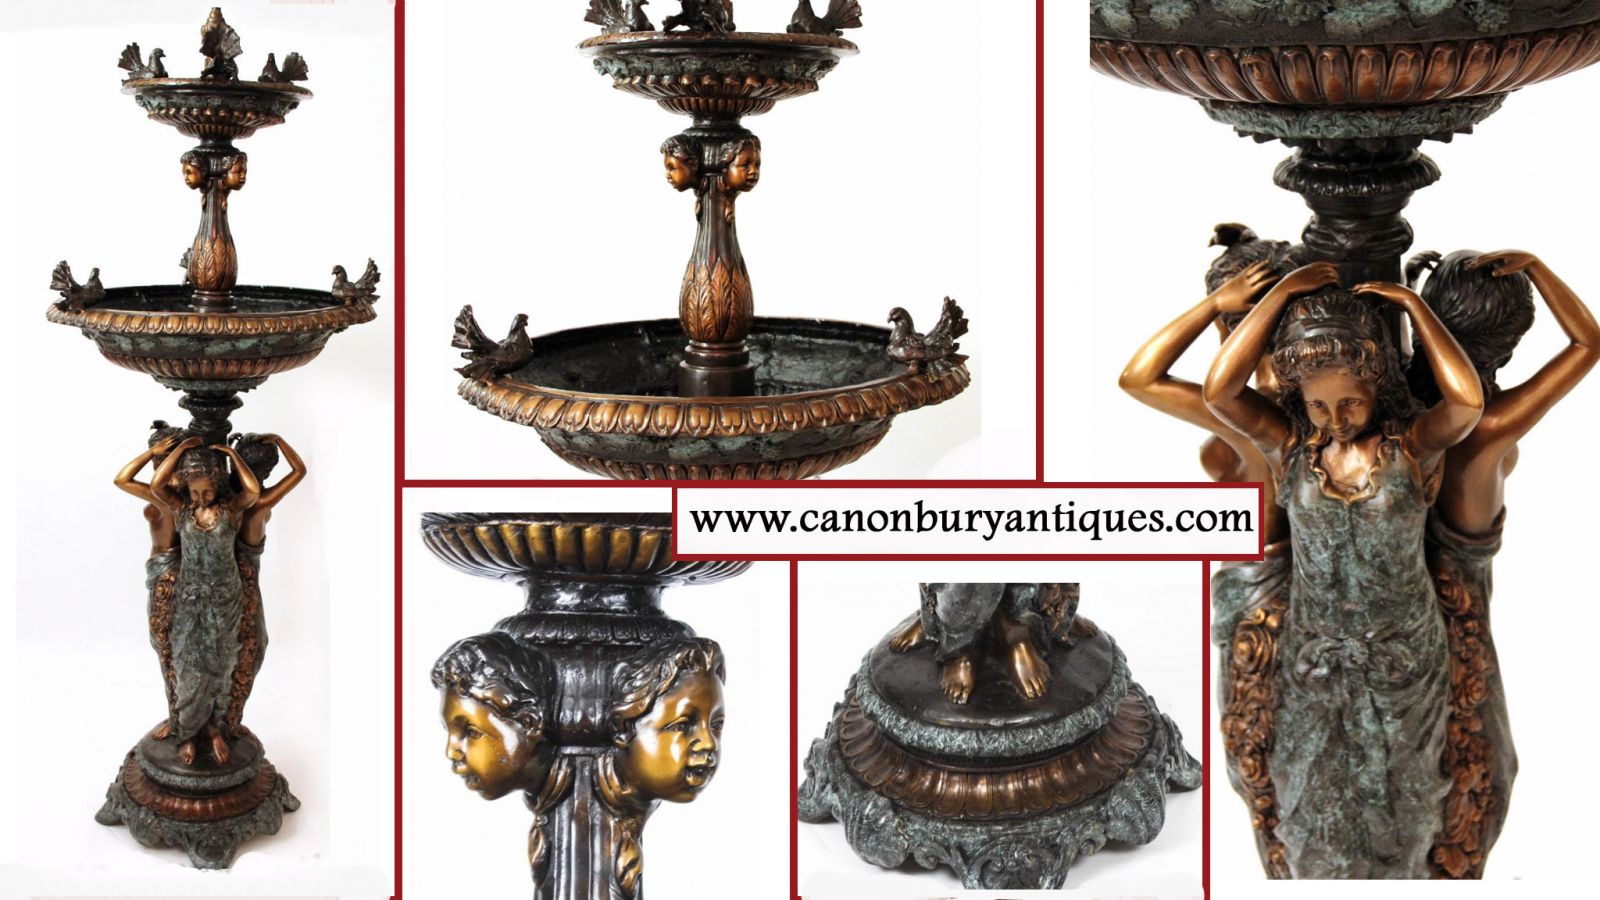 Classical Maiden Fountain - French Bronze Water Feature